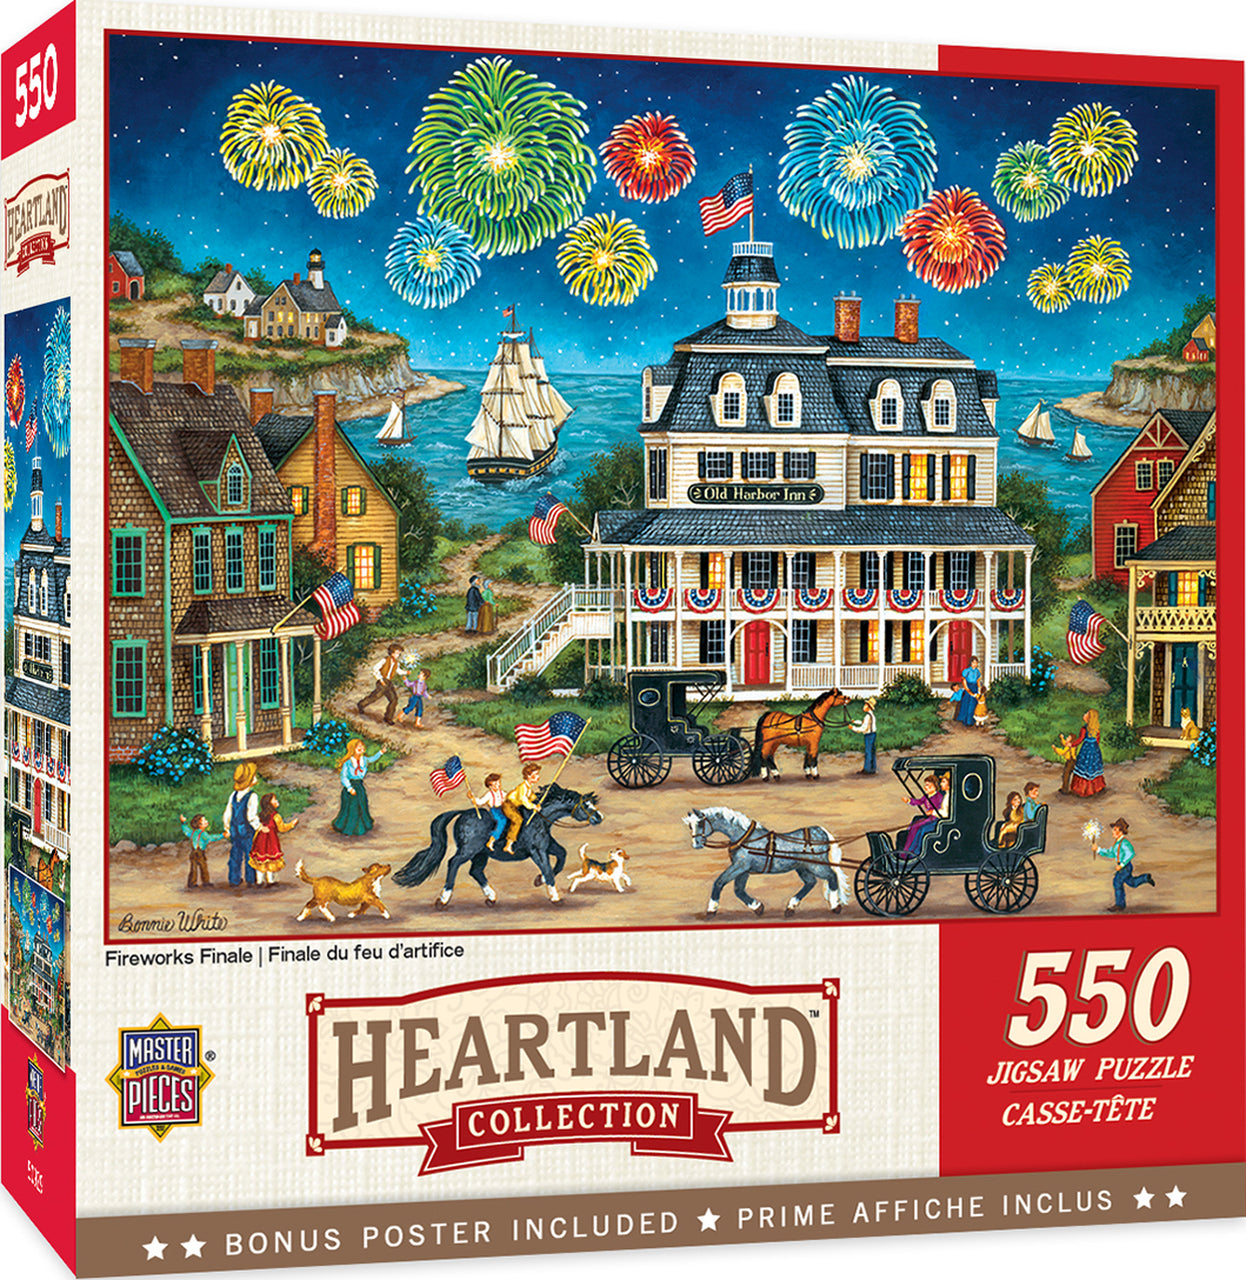 Heartland Collection Fireworks Finale - 550 Piece Jigsaw Puzzle by Masterpieces